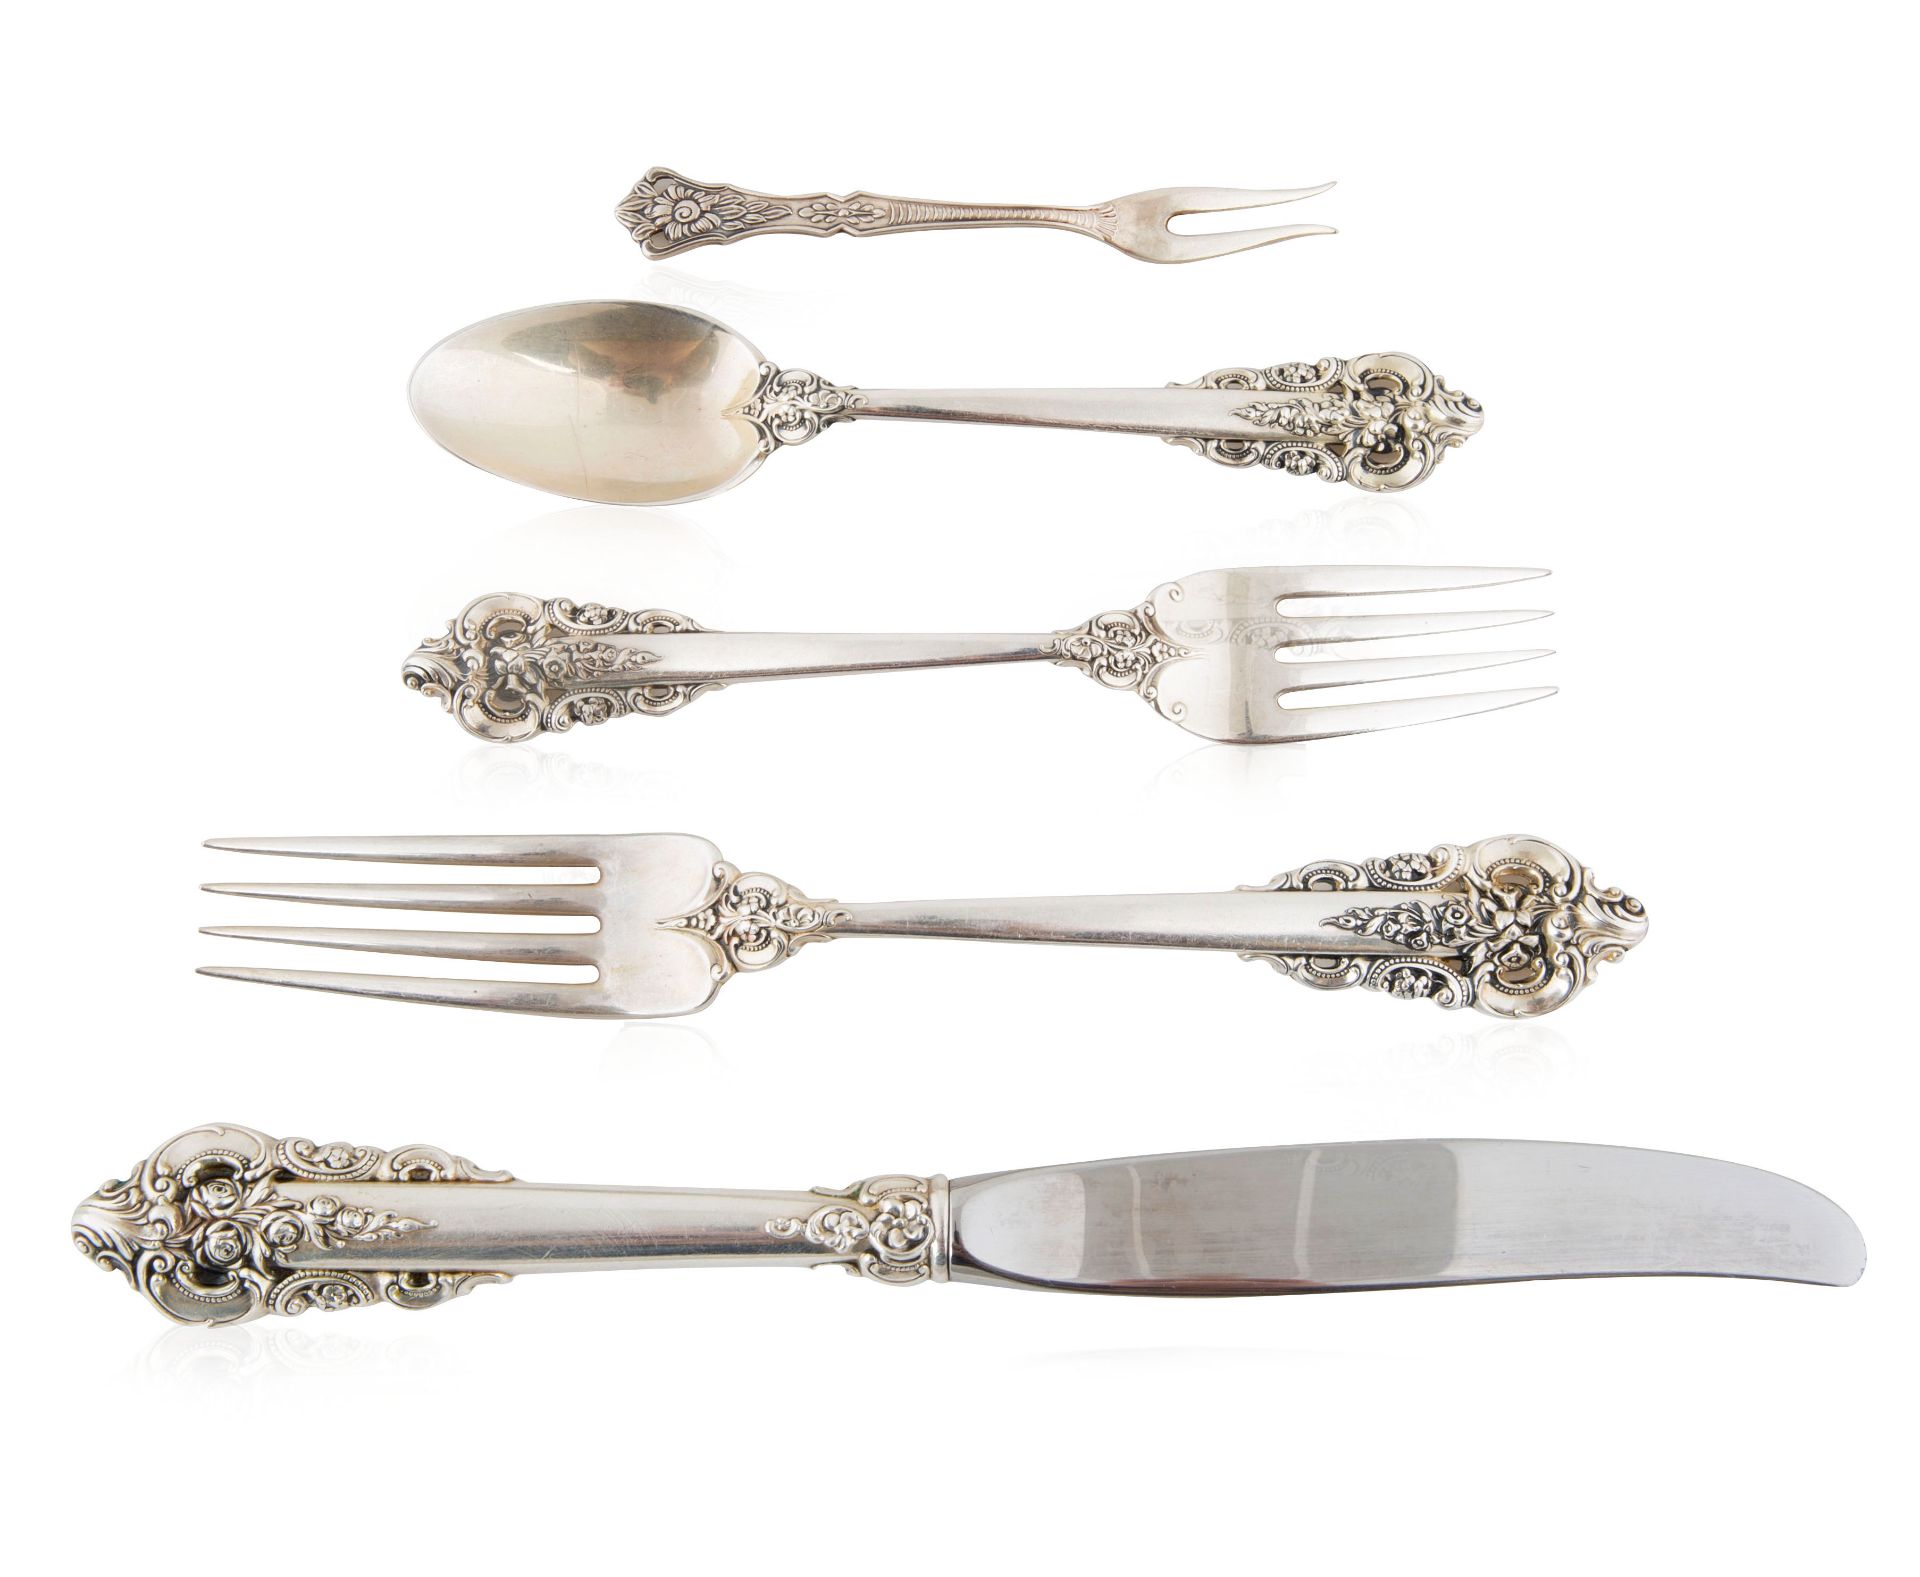 A 101-PIECE AMERICAN 'GRAND BAROQUE' SILVER SET, WALLACE STERLING, LATE 20TH CENTURY - Image 5 of 6